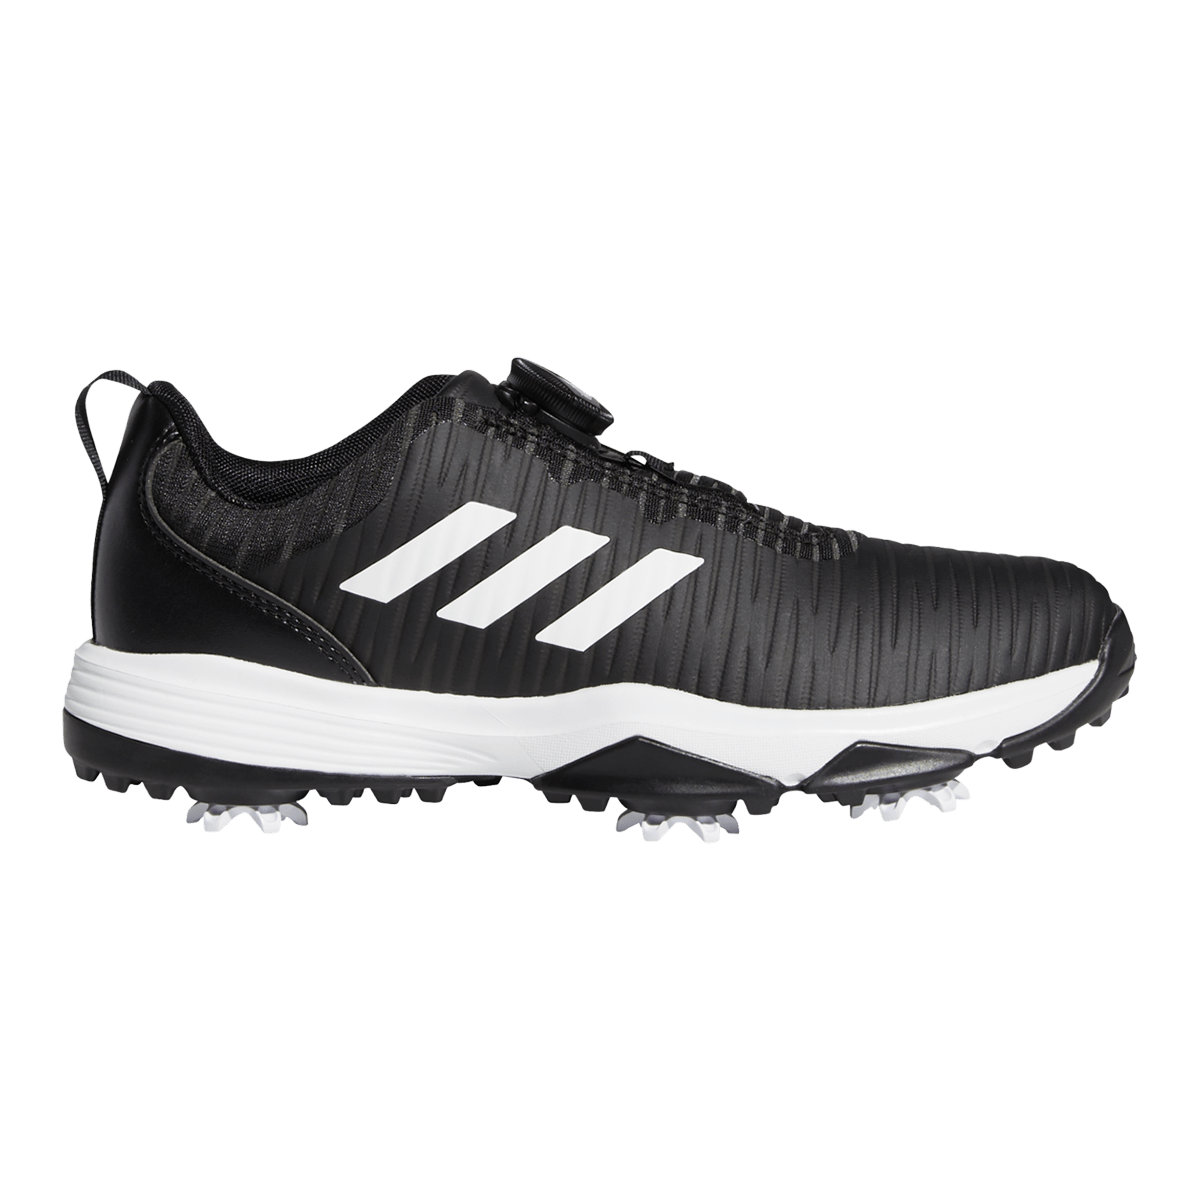 childrens golf shoes size 1